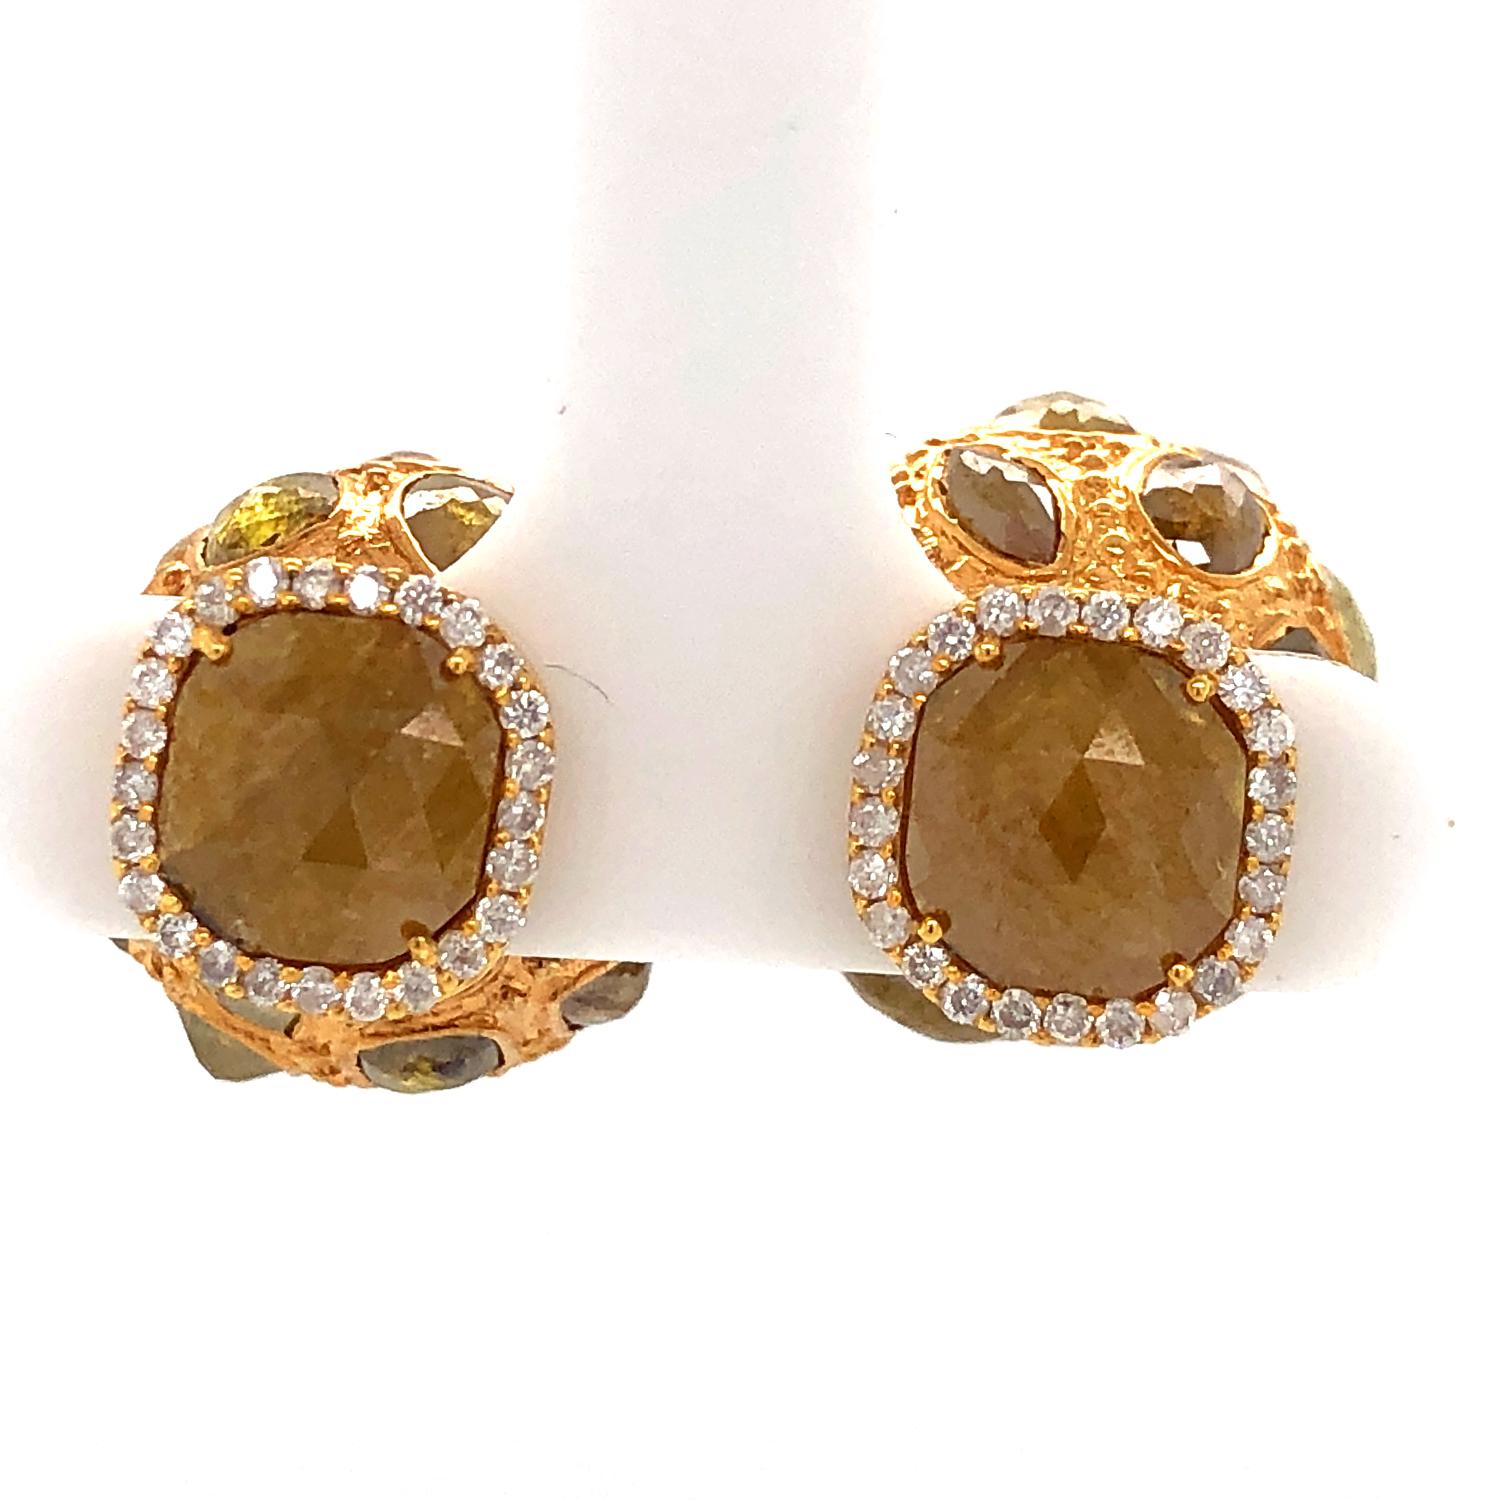 Ice Diamond Beads Earrings with Pave Diamonds Made in 18k Gold For Sale 1